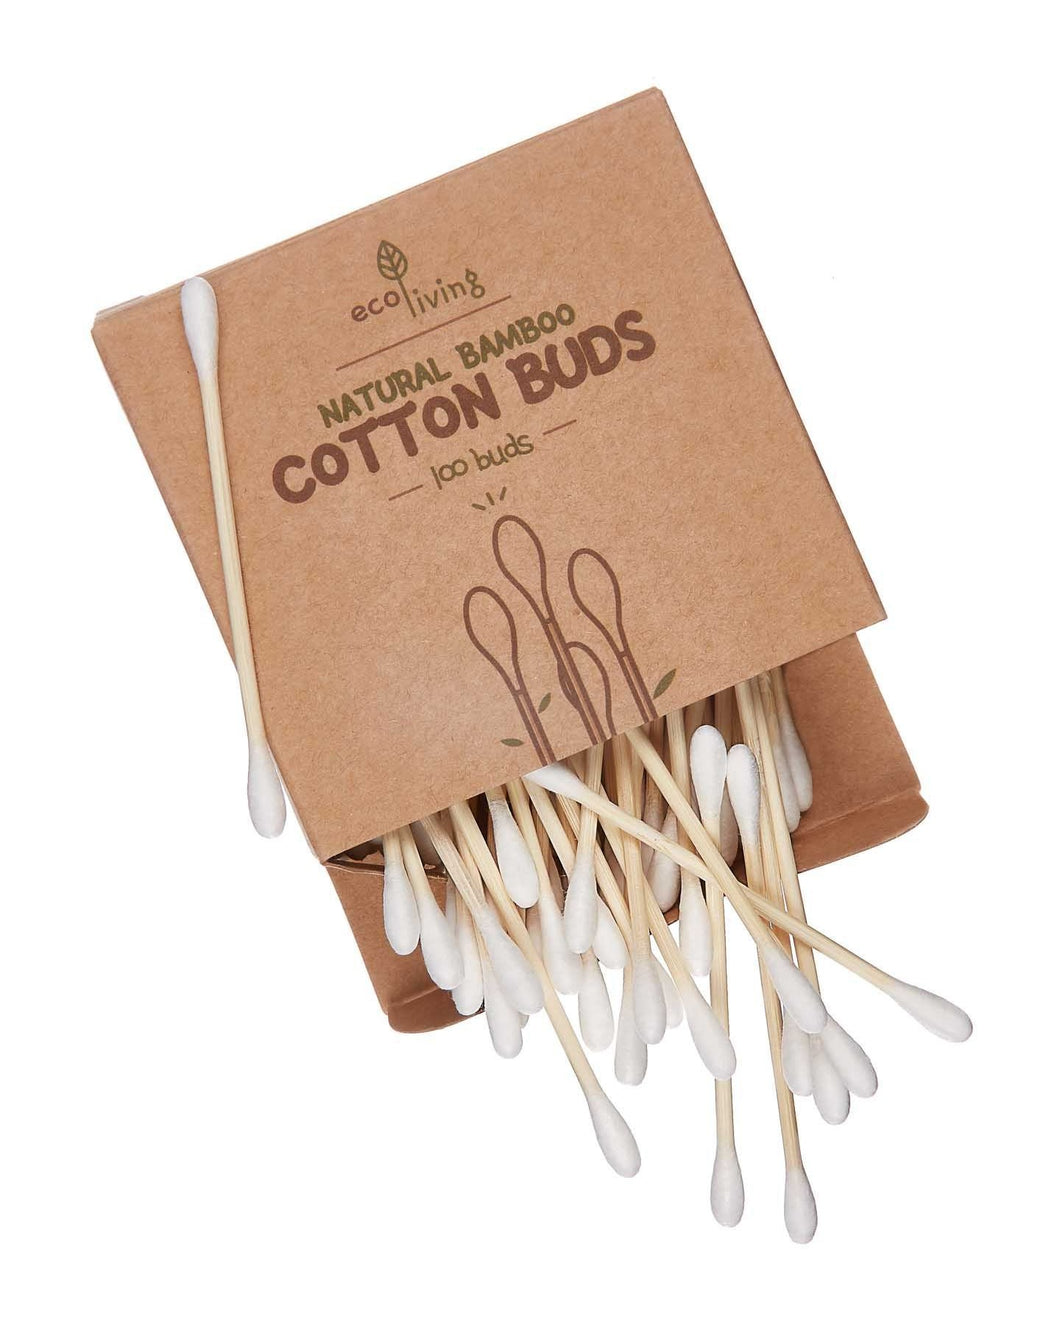 EcoLiving Natural Bamboo Biodegradable Cotton Buds